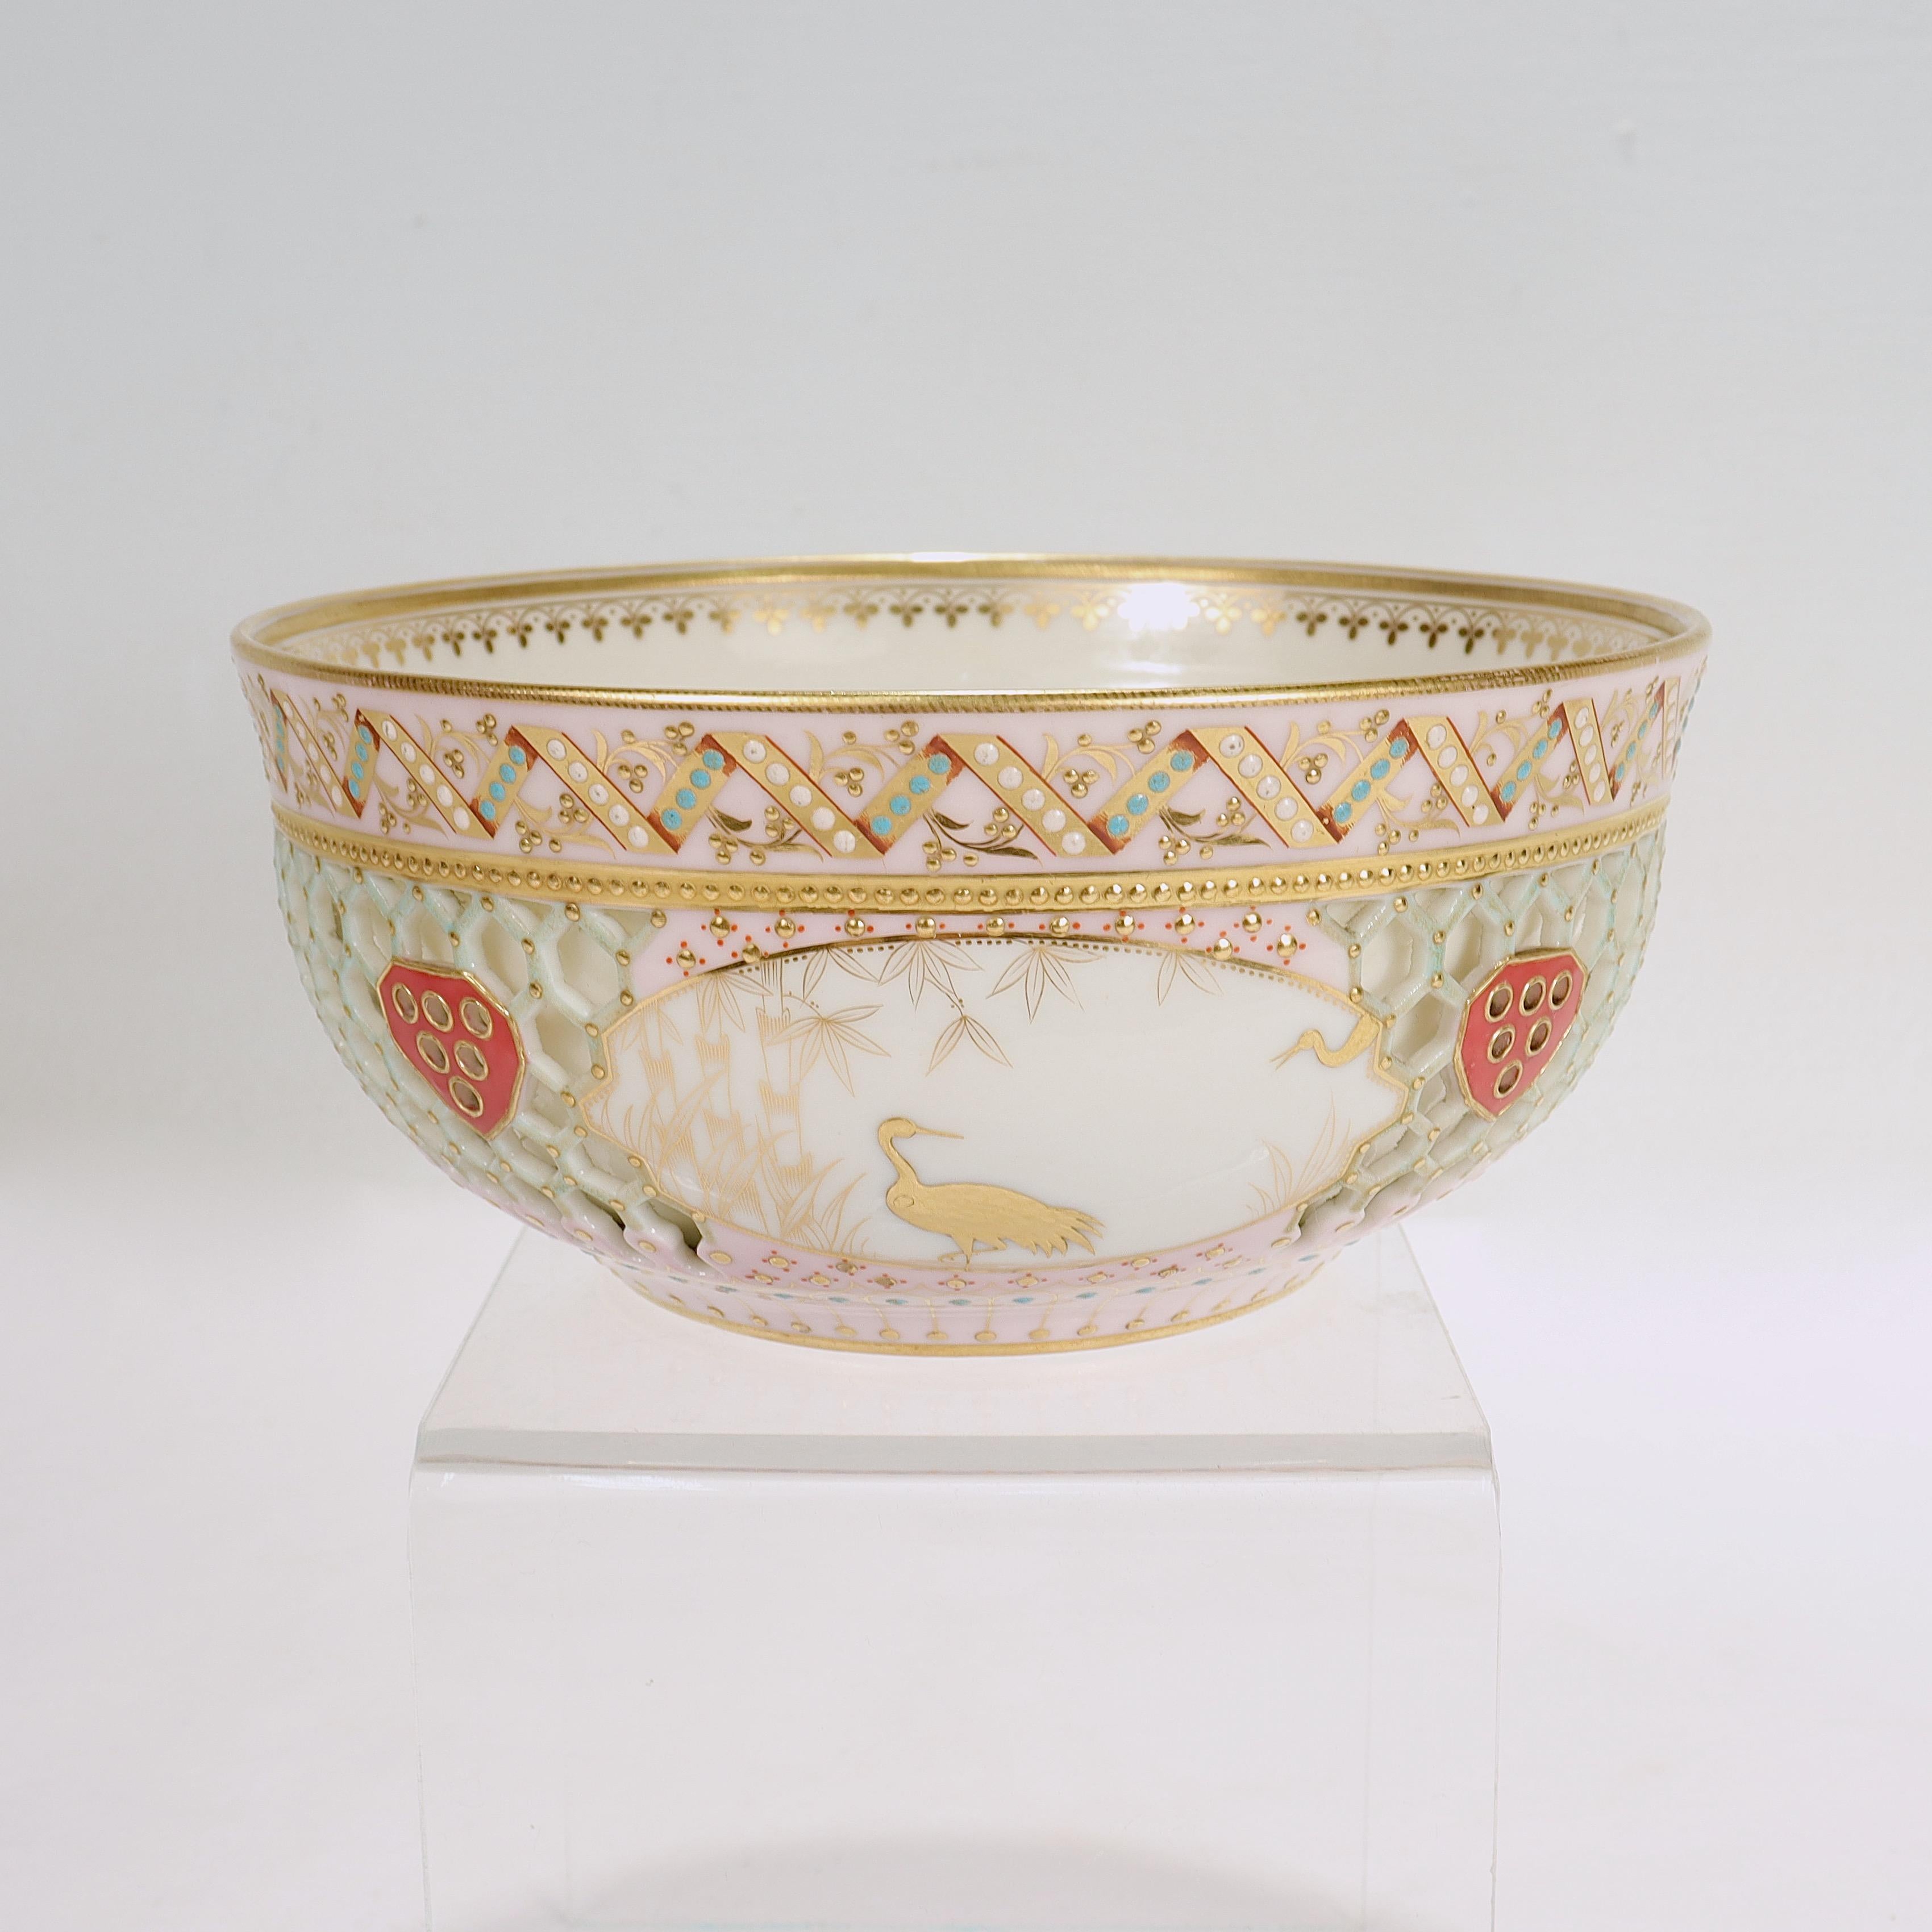 Reticulated Royal Worcester Porcelain Bowl Attr. to George Owen & Samuel Ranford In Good Condition For Sale In Philadelphia, PA